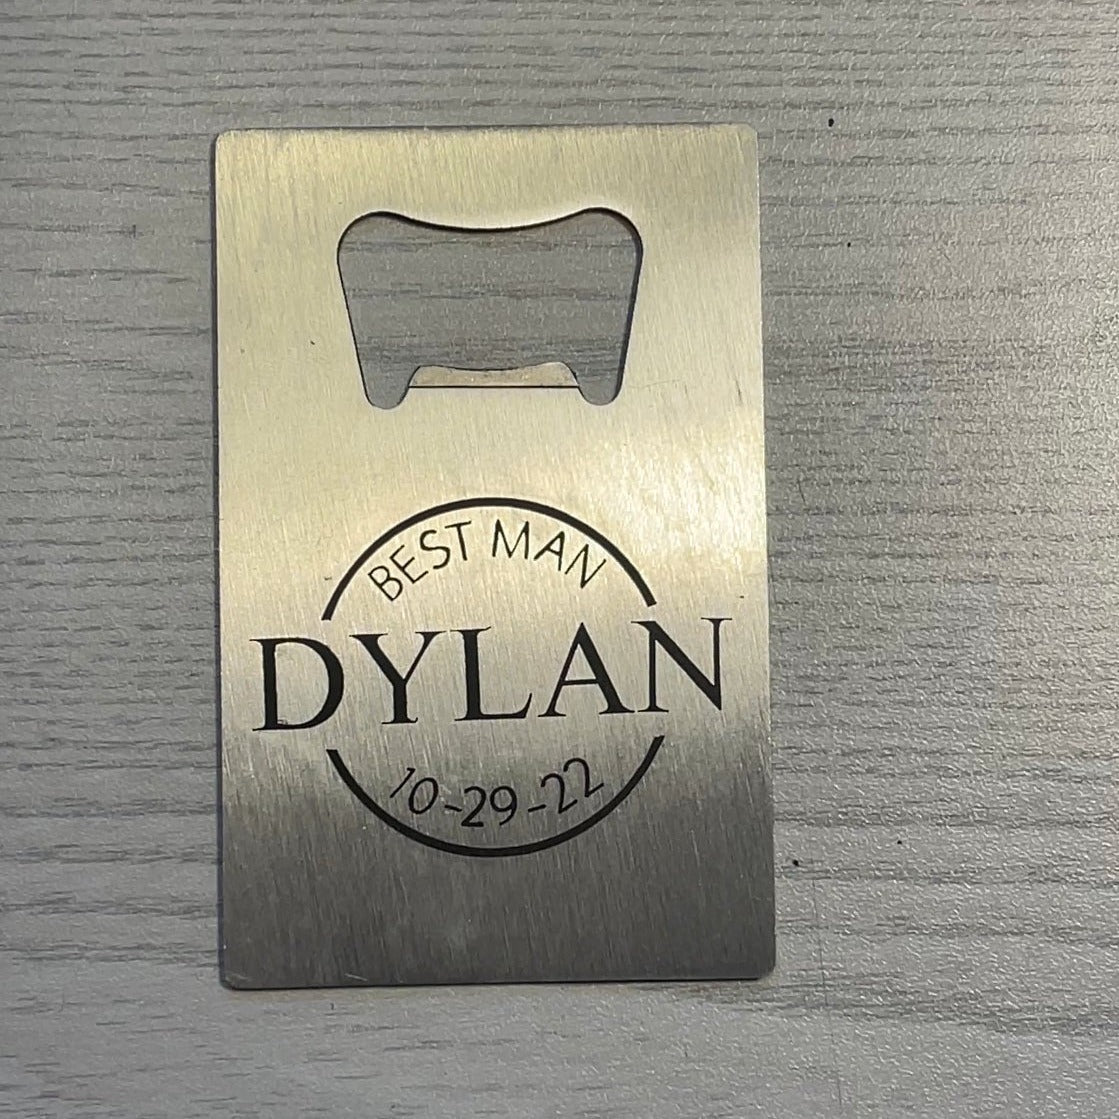 A rectangular credit card sized bottle opener is pictured with a design below the opening, The text in the design frames a circle and reads "Best Man" at the top and "10-29-22" at the bottom. The name "Dylan" cuts through the circle in all capital letters.